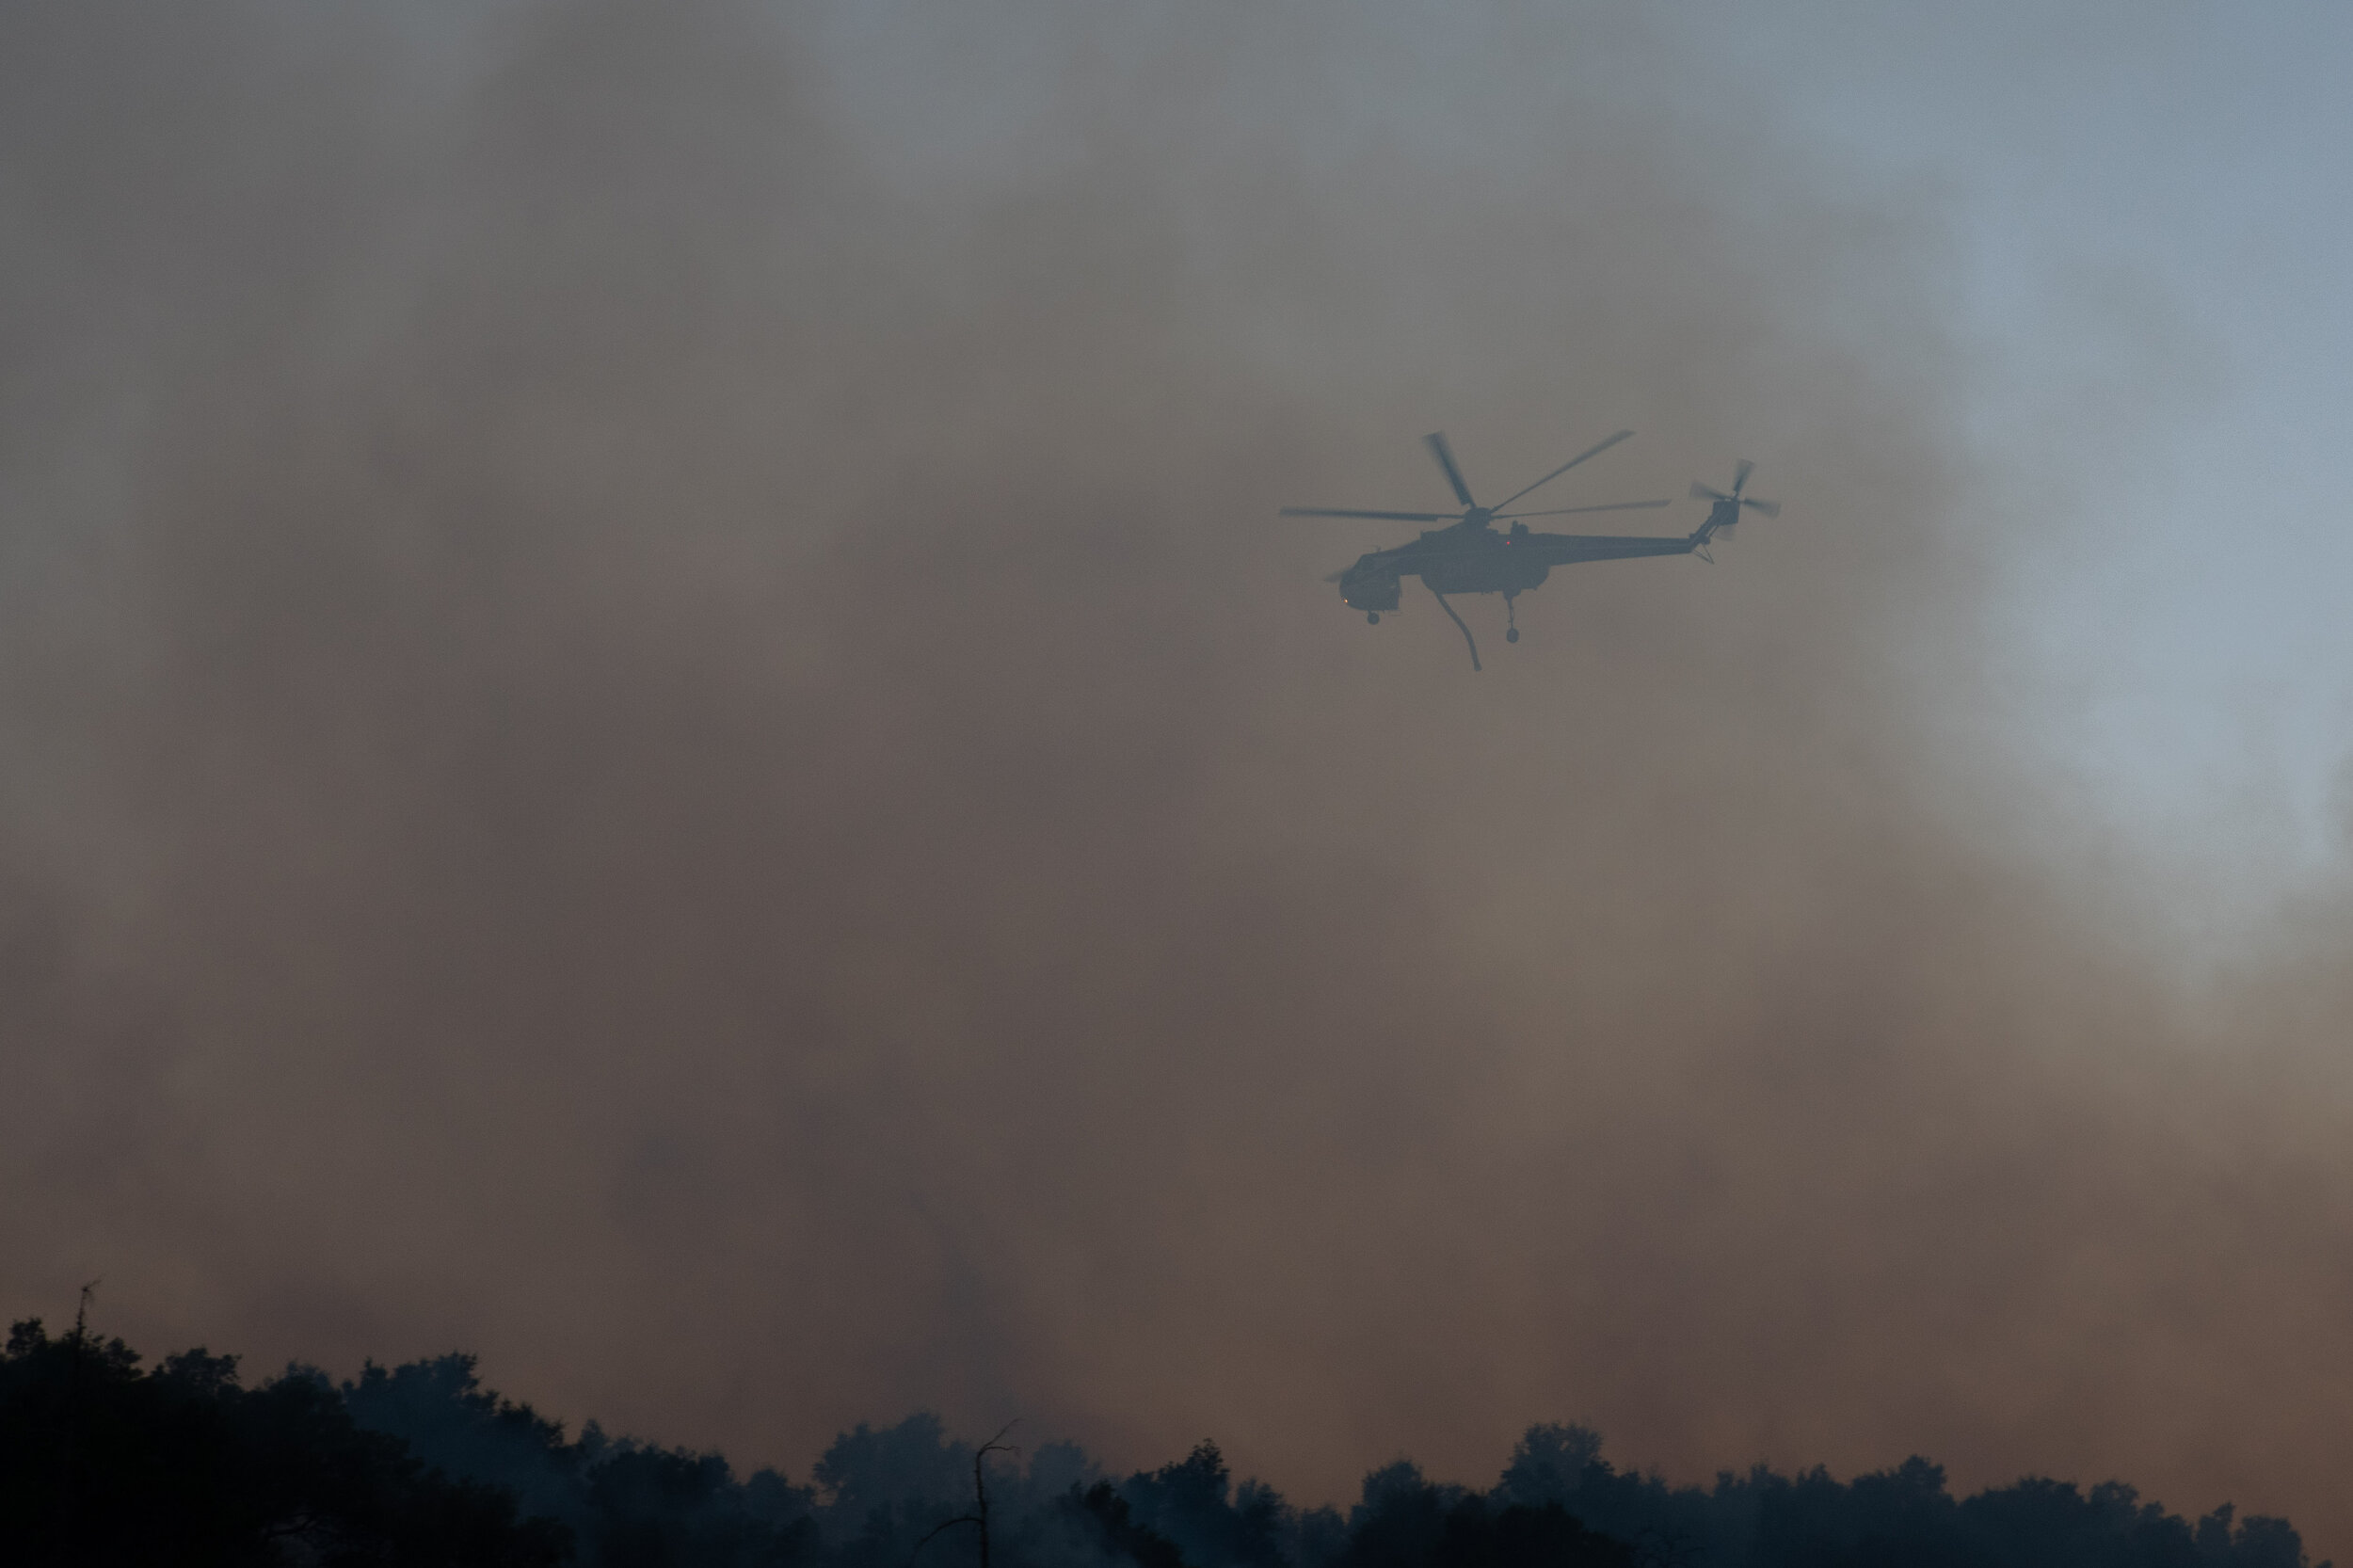  A helitanker behind a cloud of smoke just before it drops water on the Saddlerige Fire just off interstate 5 near Newhall Calif. on Friday, Oct. 11, 2019. (Conner Savage/The Corsair) 